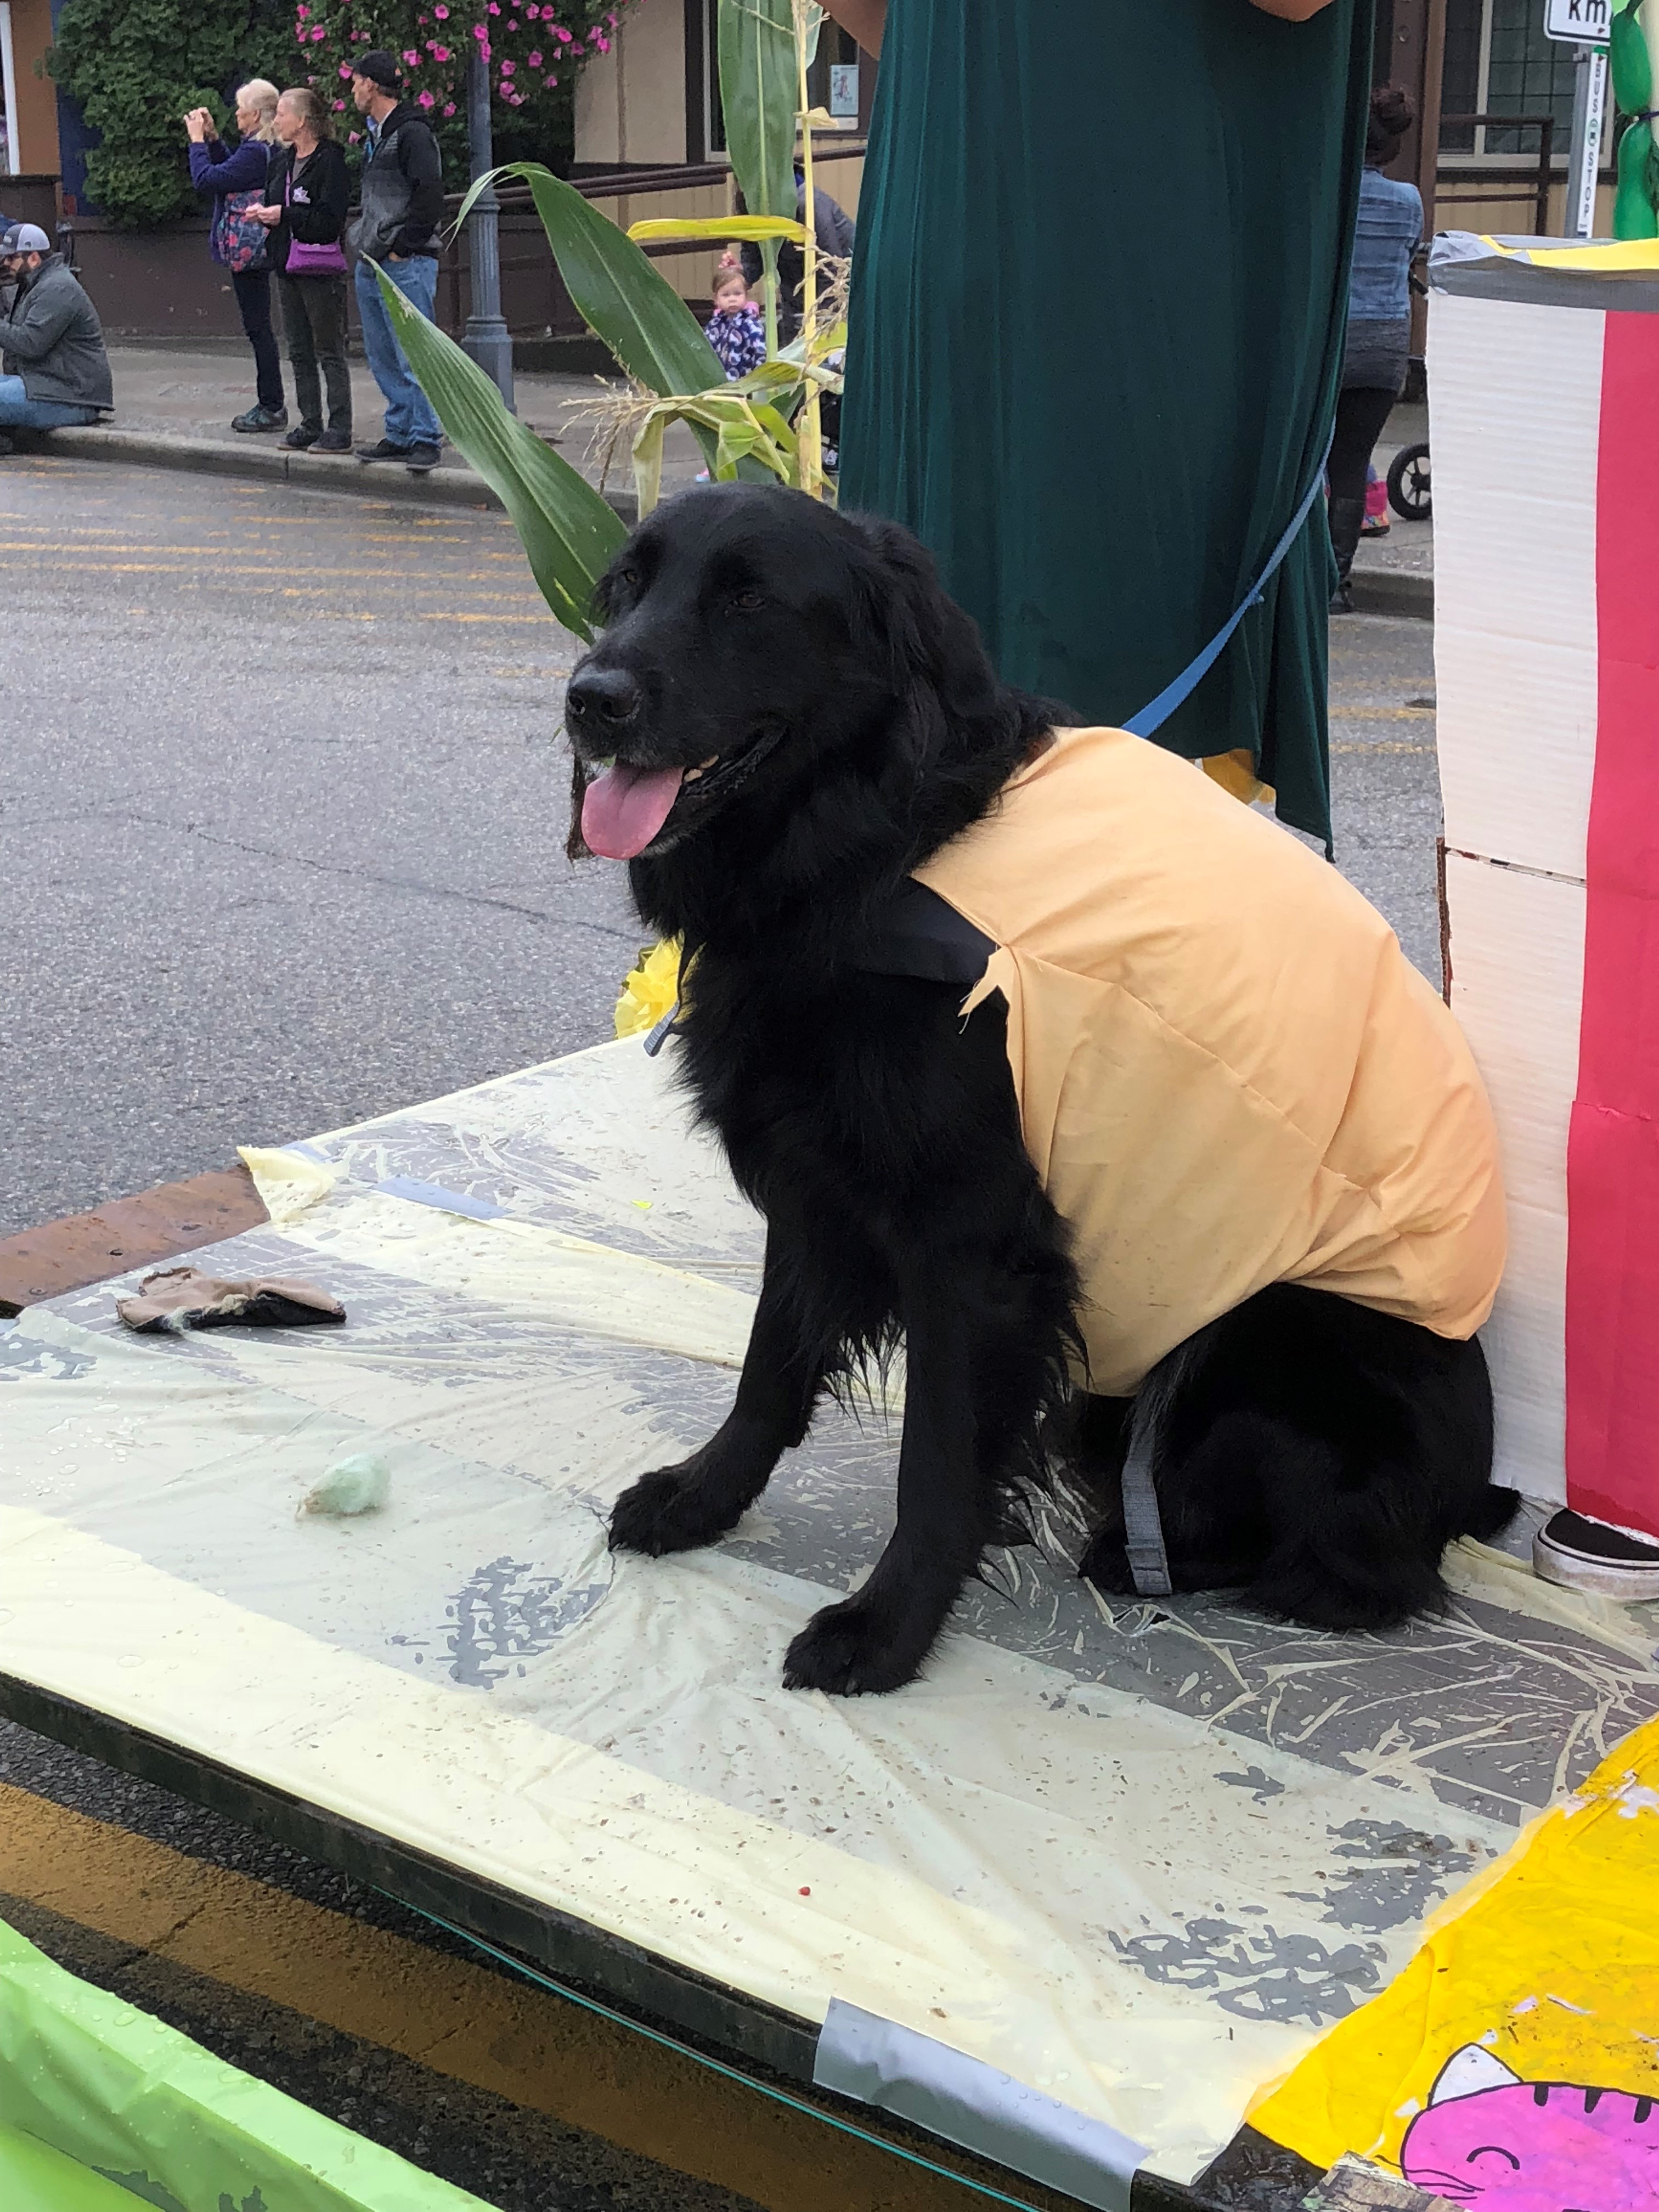 Colour photograph of a black dog dressed as a corn dog on a parade float.